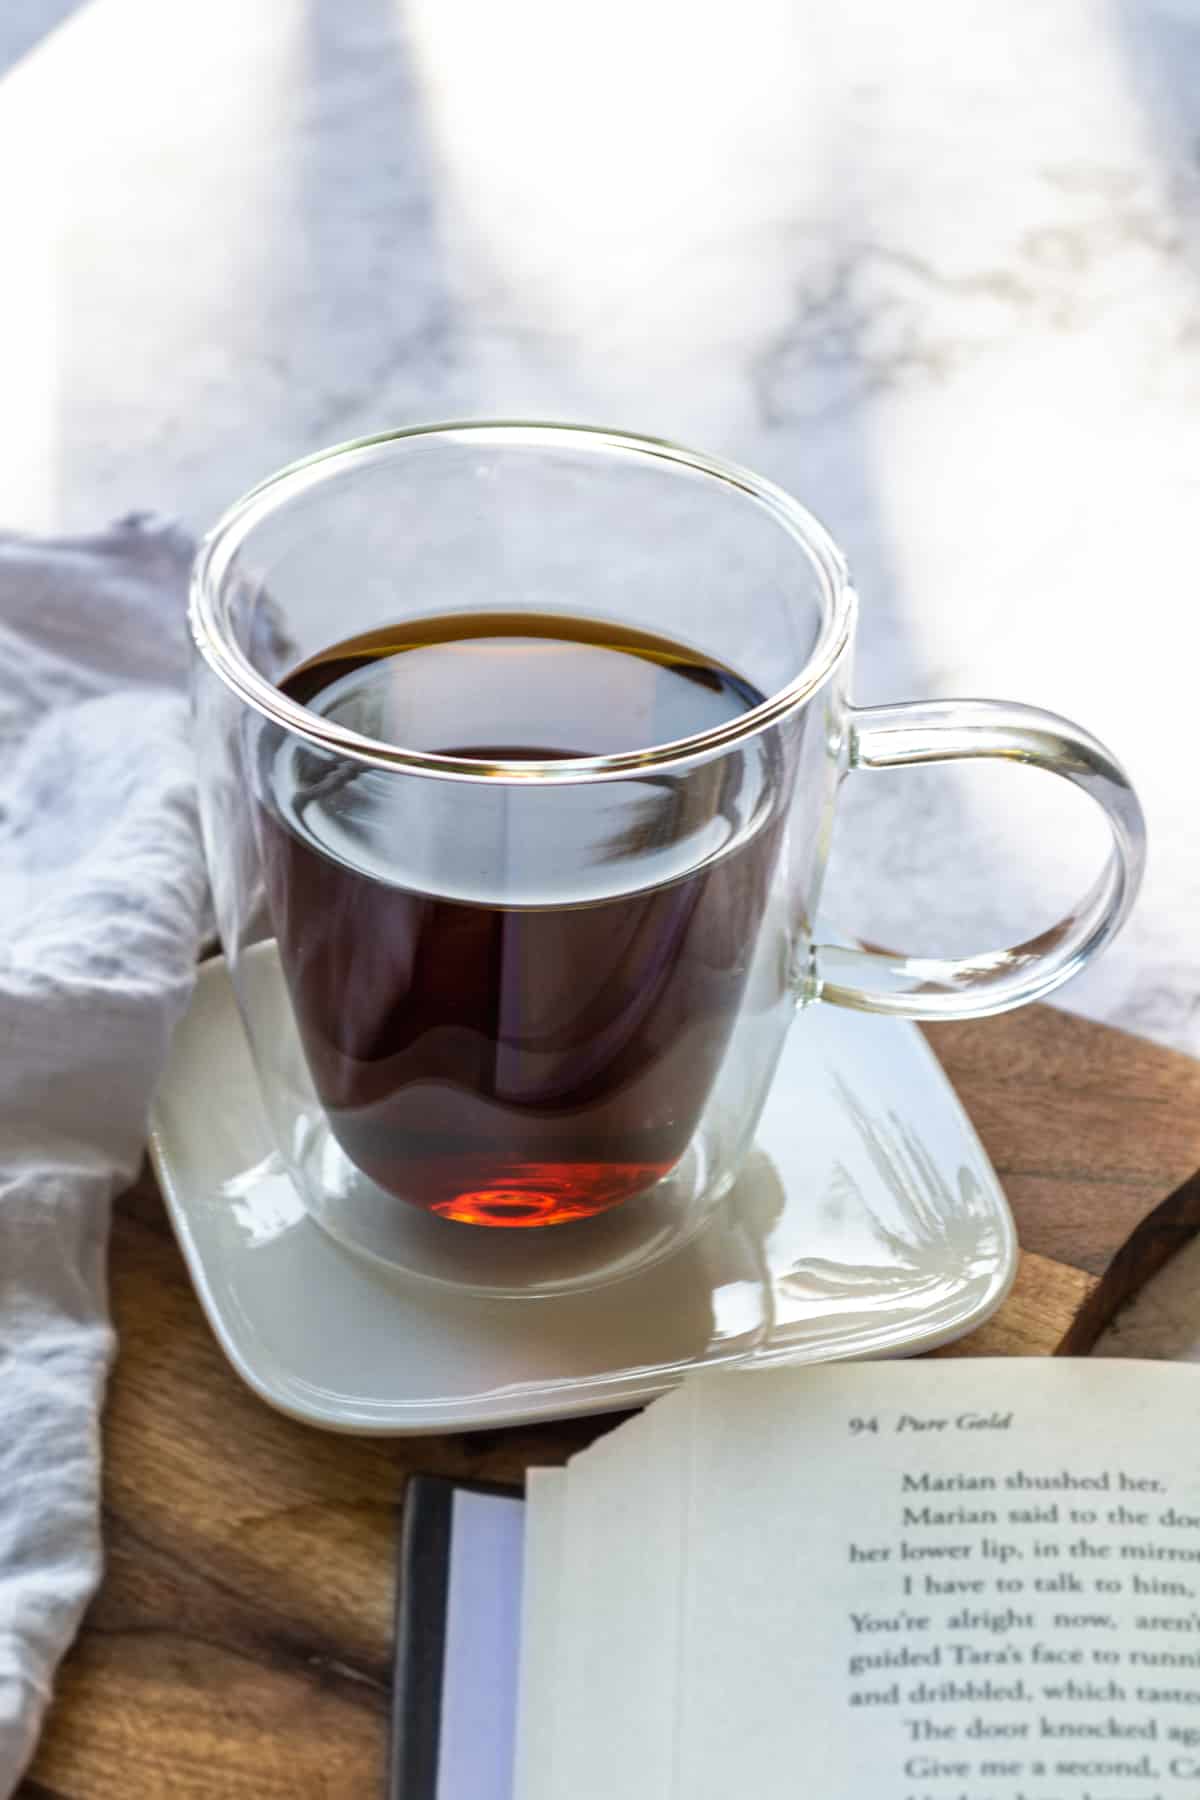 A glass mug of dandelion tea sitting on a white square plate with an open book in the foreground.